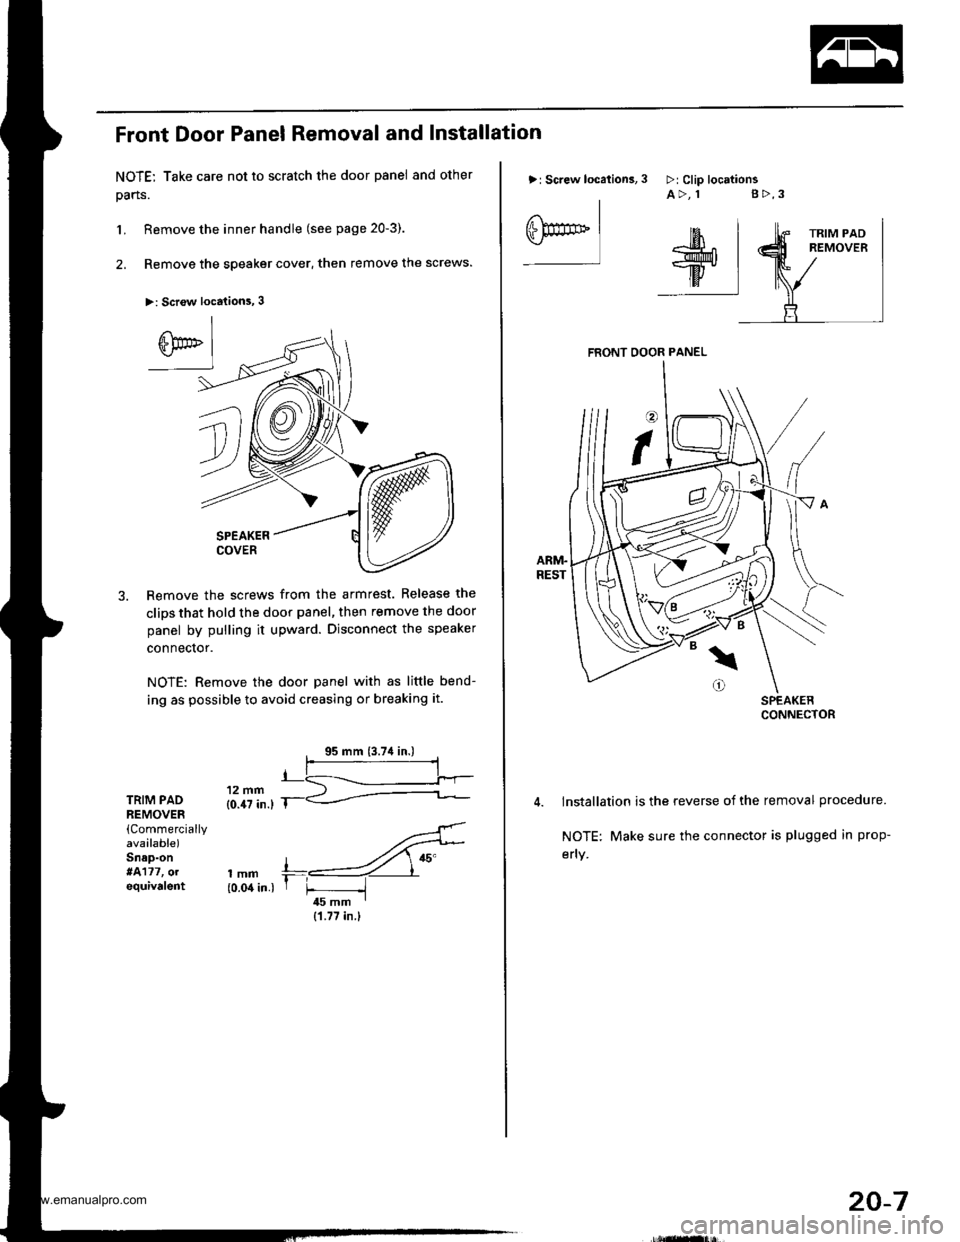 HONDA CR-V 1997 RD1-RD3 / 1.G User Guide 
Front Door Panel Removal and Installation
NOTE: Take care not to scratch the door panel and other
pans.
L Remove the inner handle (see page 20-3).
2. Remove the speaker cover, then remove the screws.